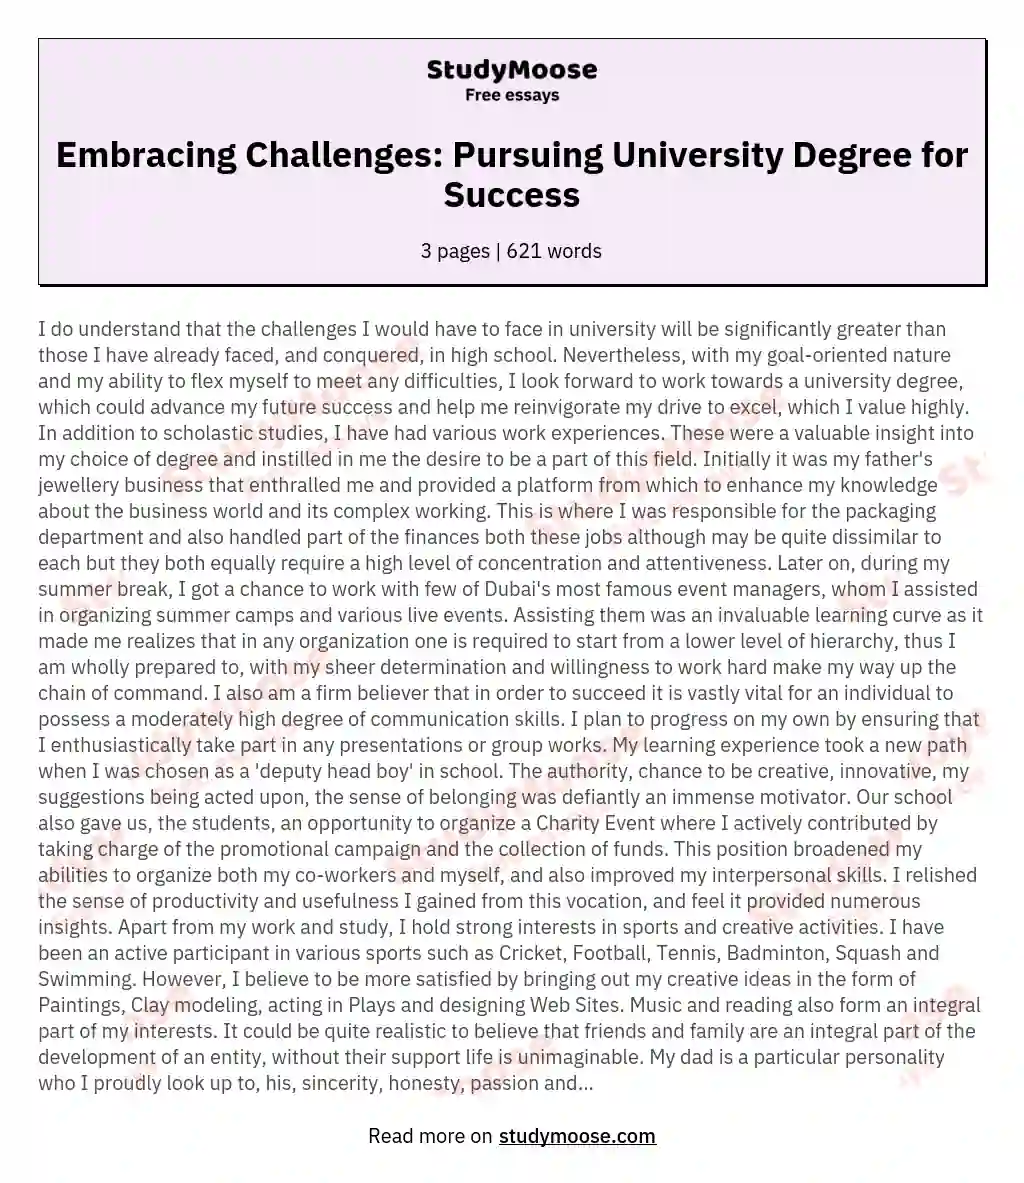 Embracing Challenges: Pursuing University Degree for Success essay